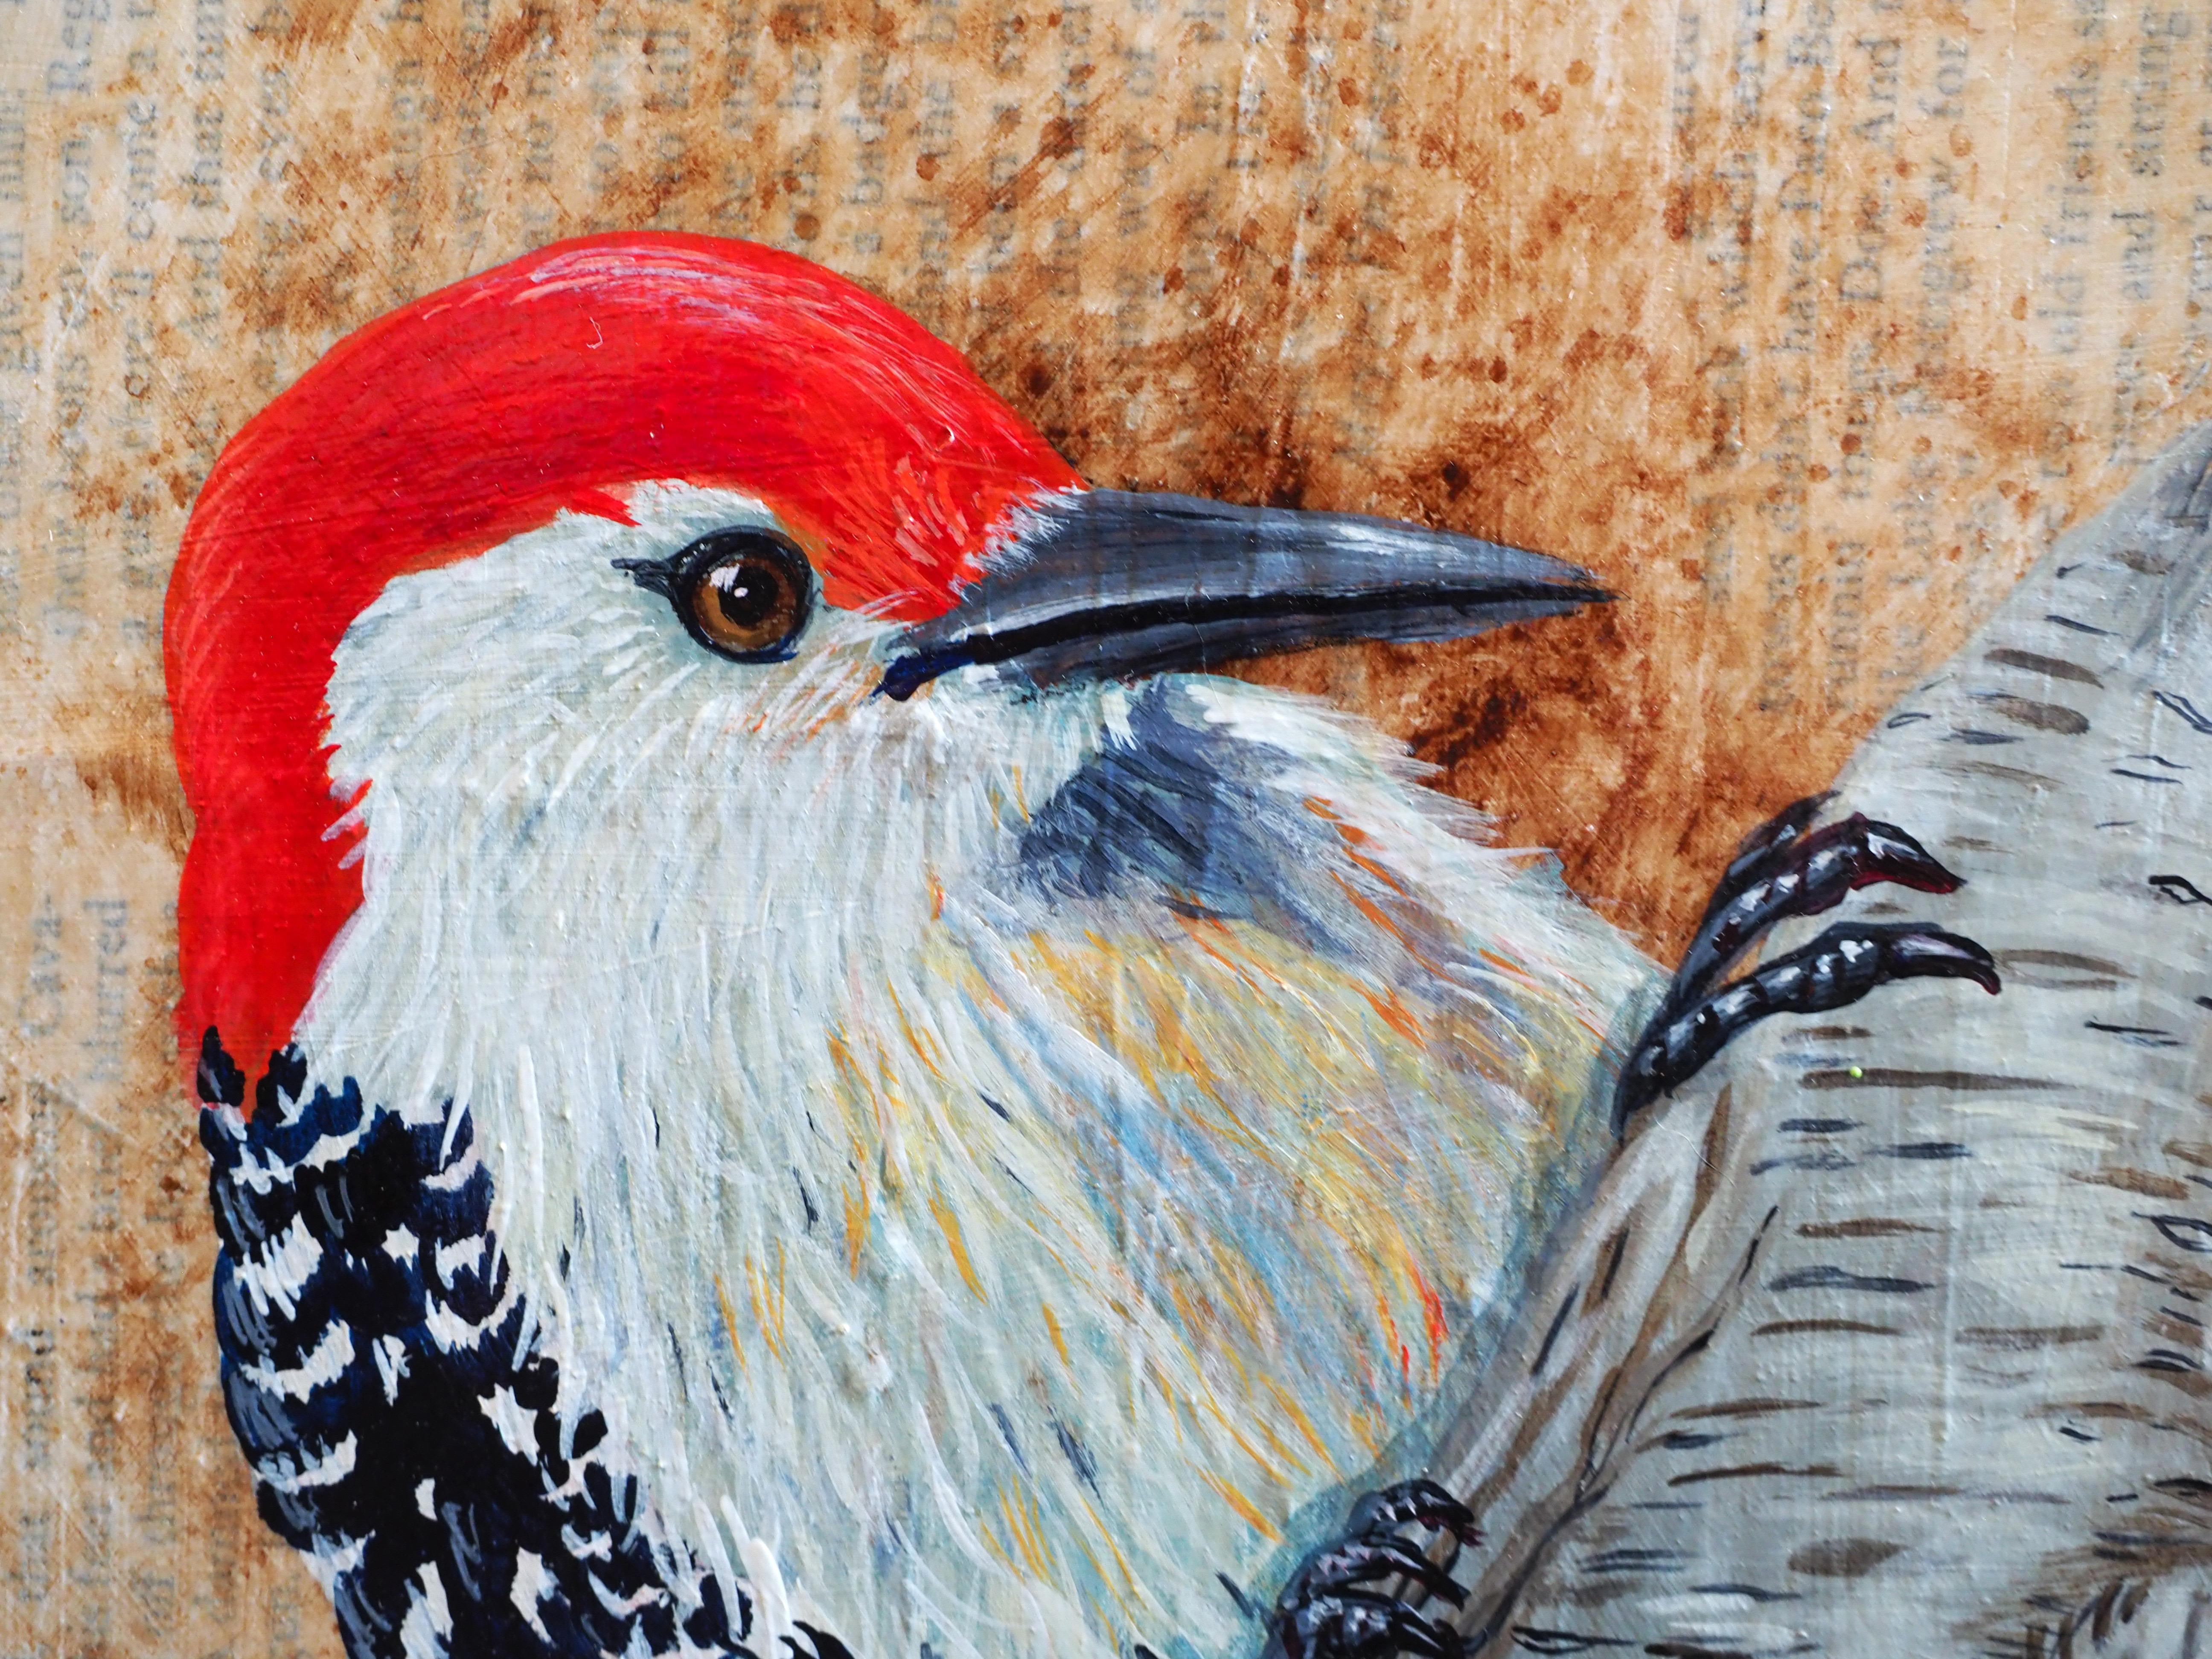 Red Bellied Woodpecker displays a woodpecker with red coloring on his head and black and white wings holding onto a light brown branch. The background consists of layers of book pages and thin washes of paint. Tim Hooper employs smooth brushstrokes